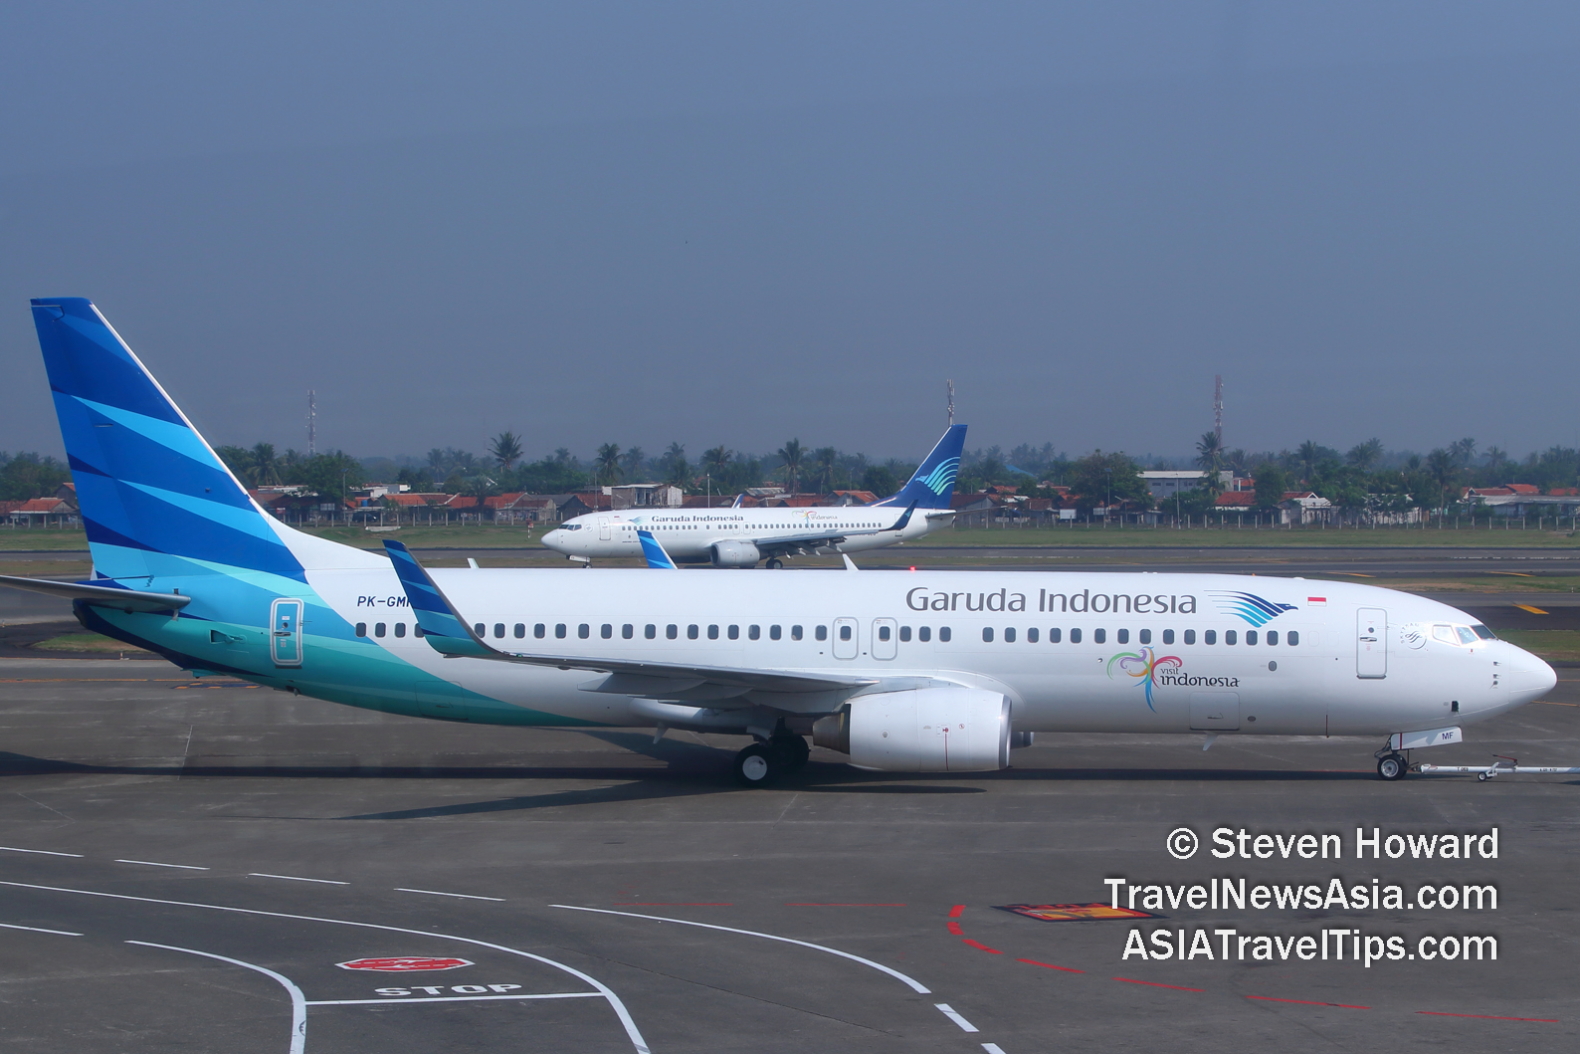 Garuda Indonesia aircraft at CGK. Picture by Steven Howard of TravelNewsAsia.com Click to enlarge.